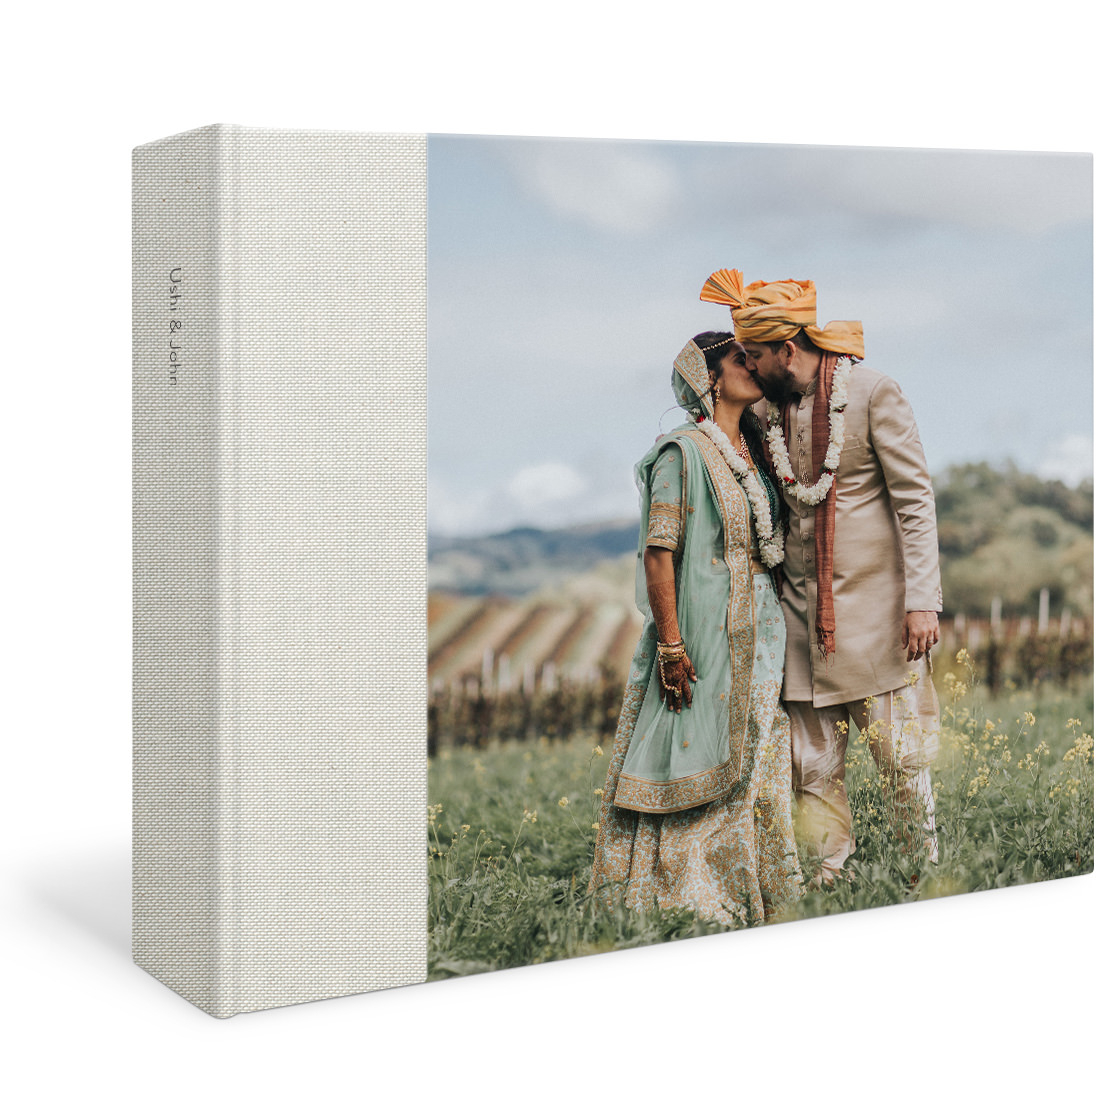 Large premium square photo album with an image of a couple on their wedding day on the cover.